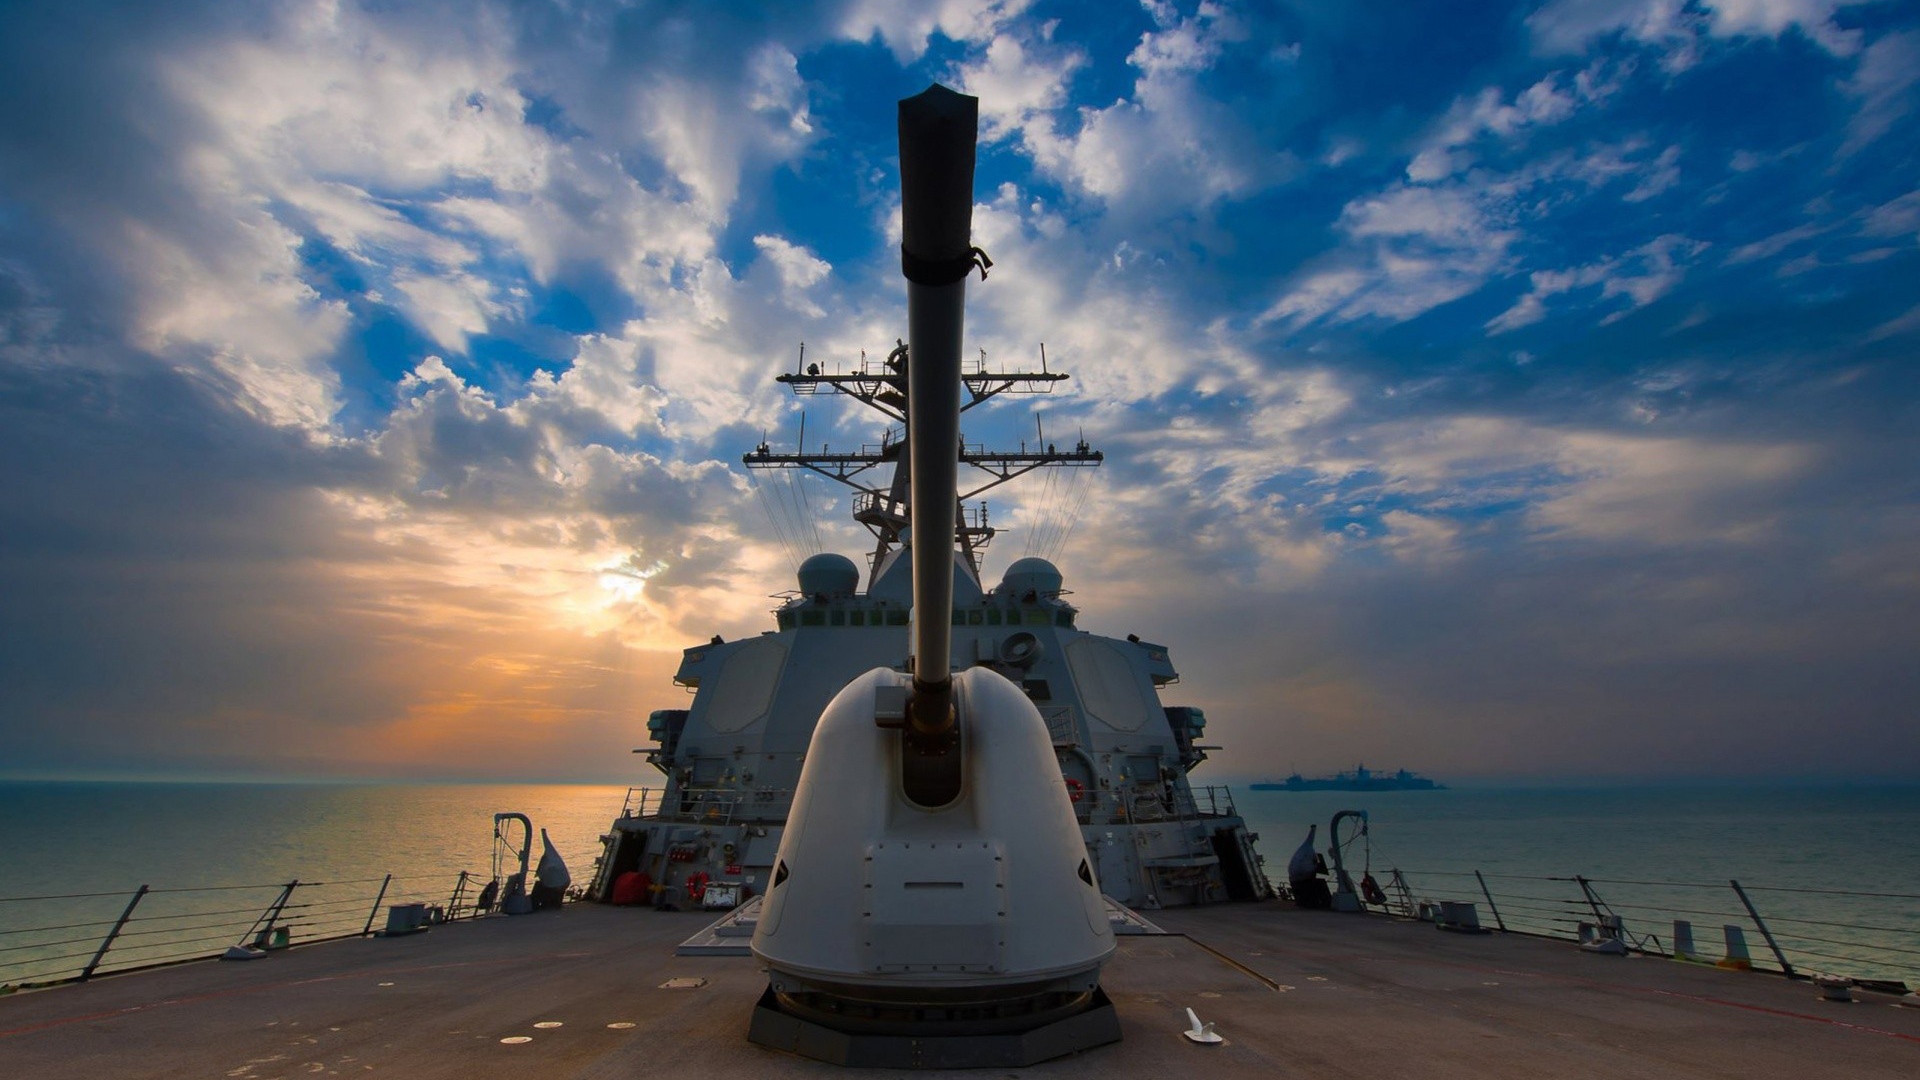 The cannon on the deck of a warship